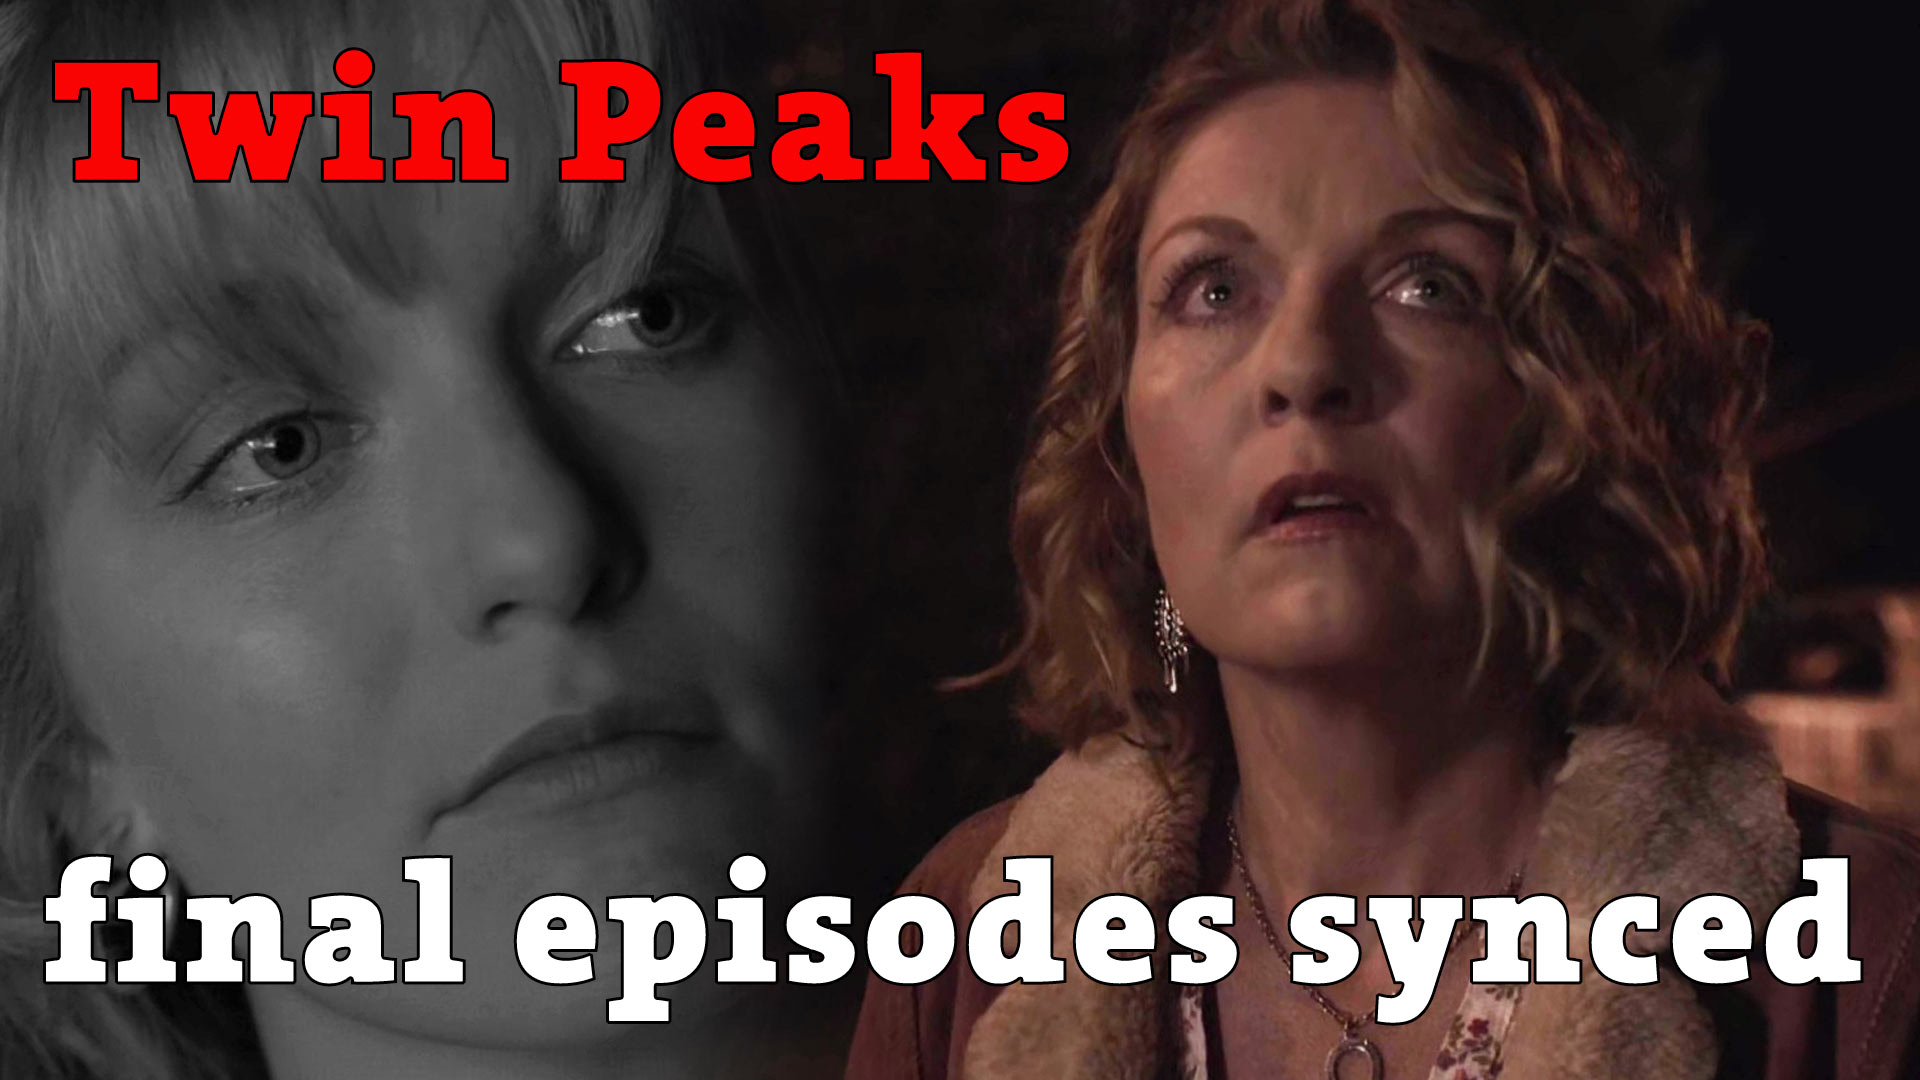 Twin Peaks final episodes synced